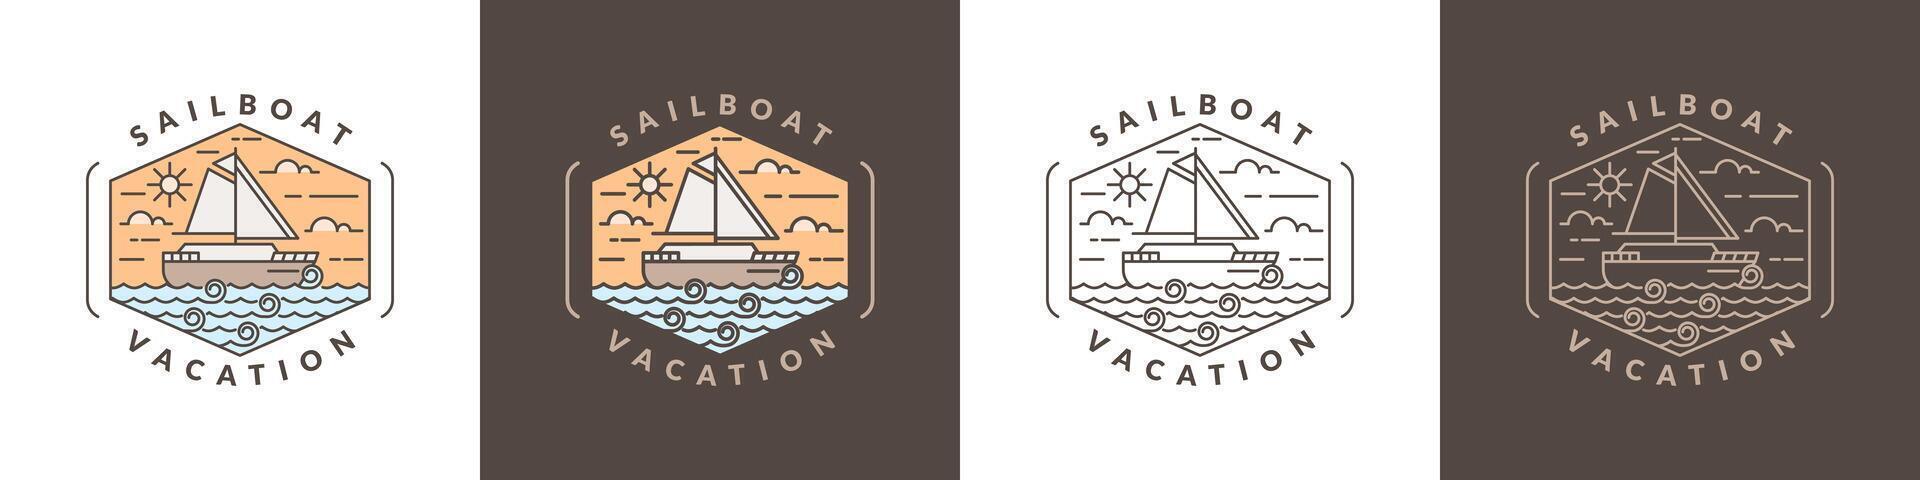 illustration of sailboat and ocean monoline or line art style vector